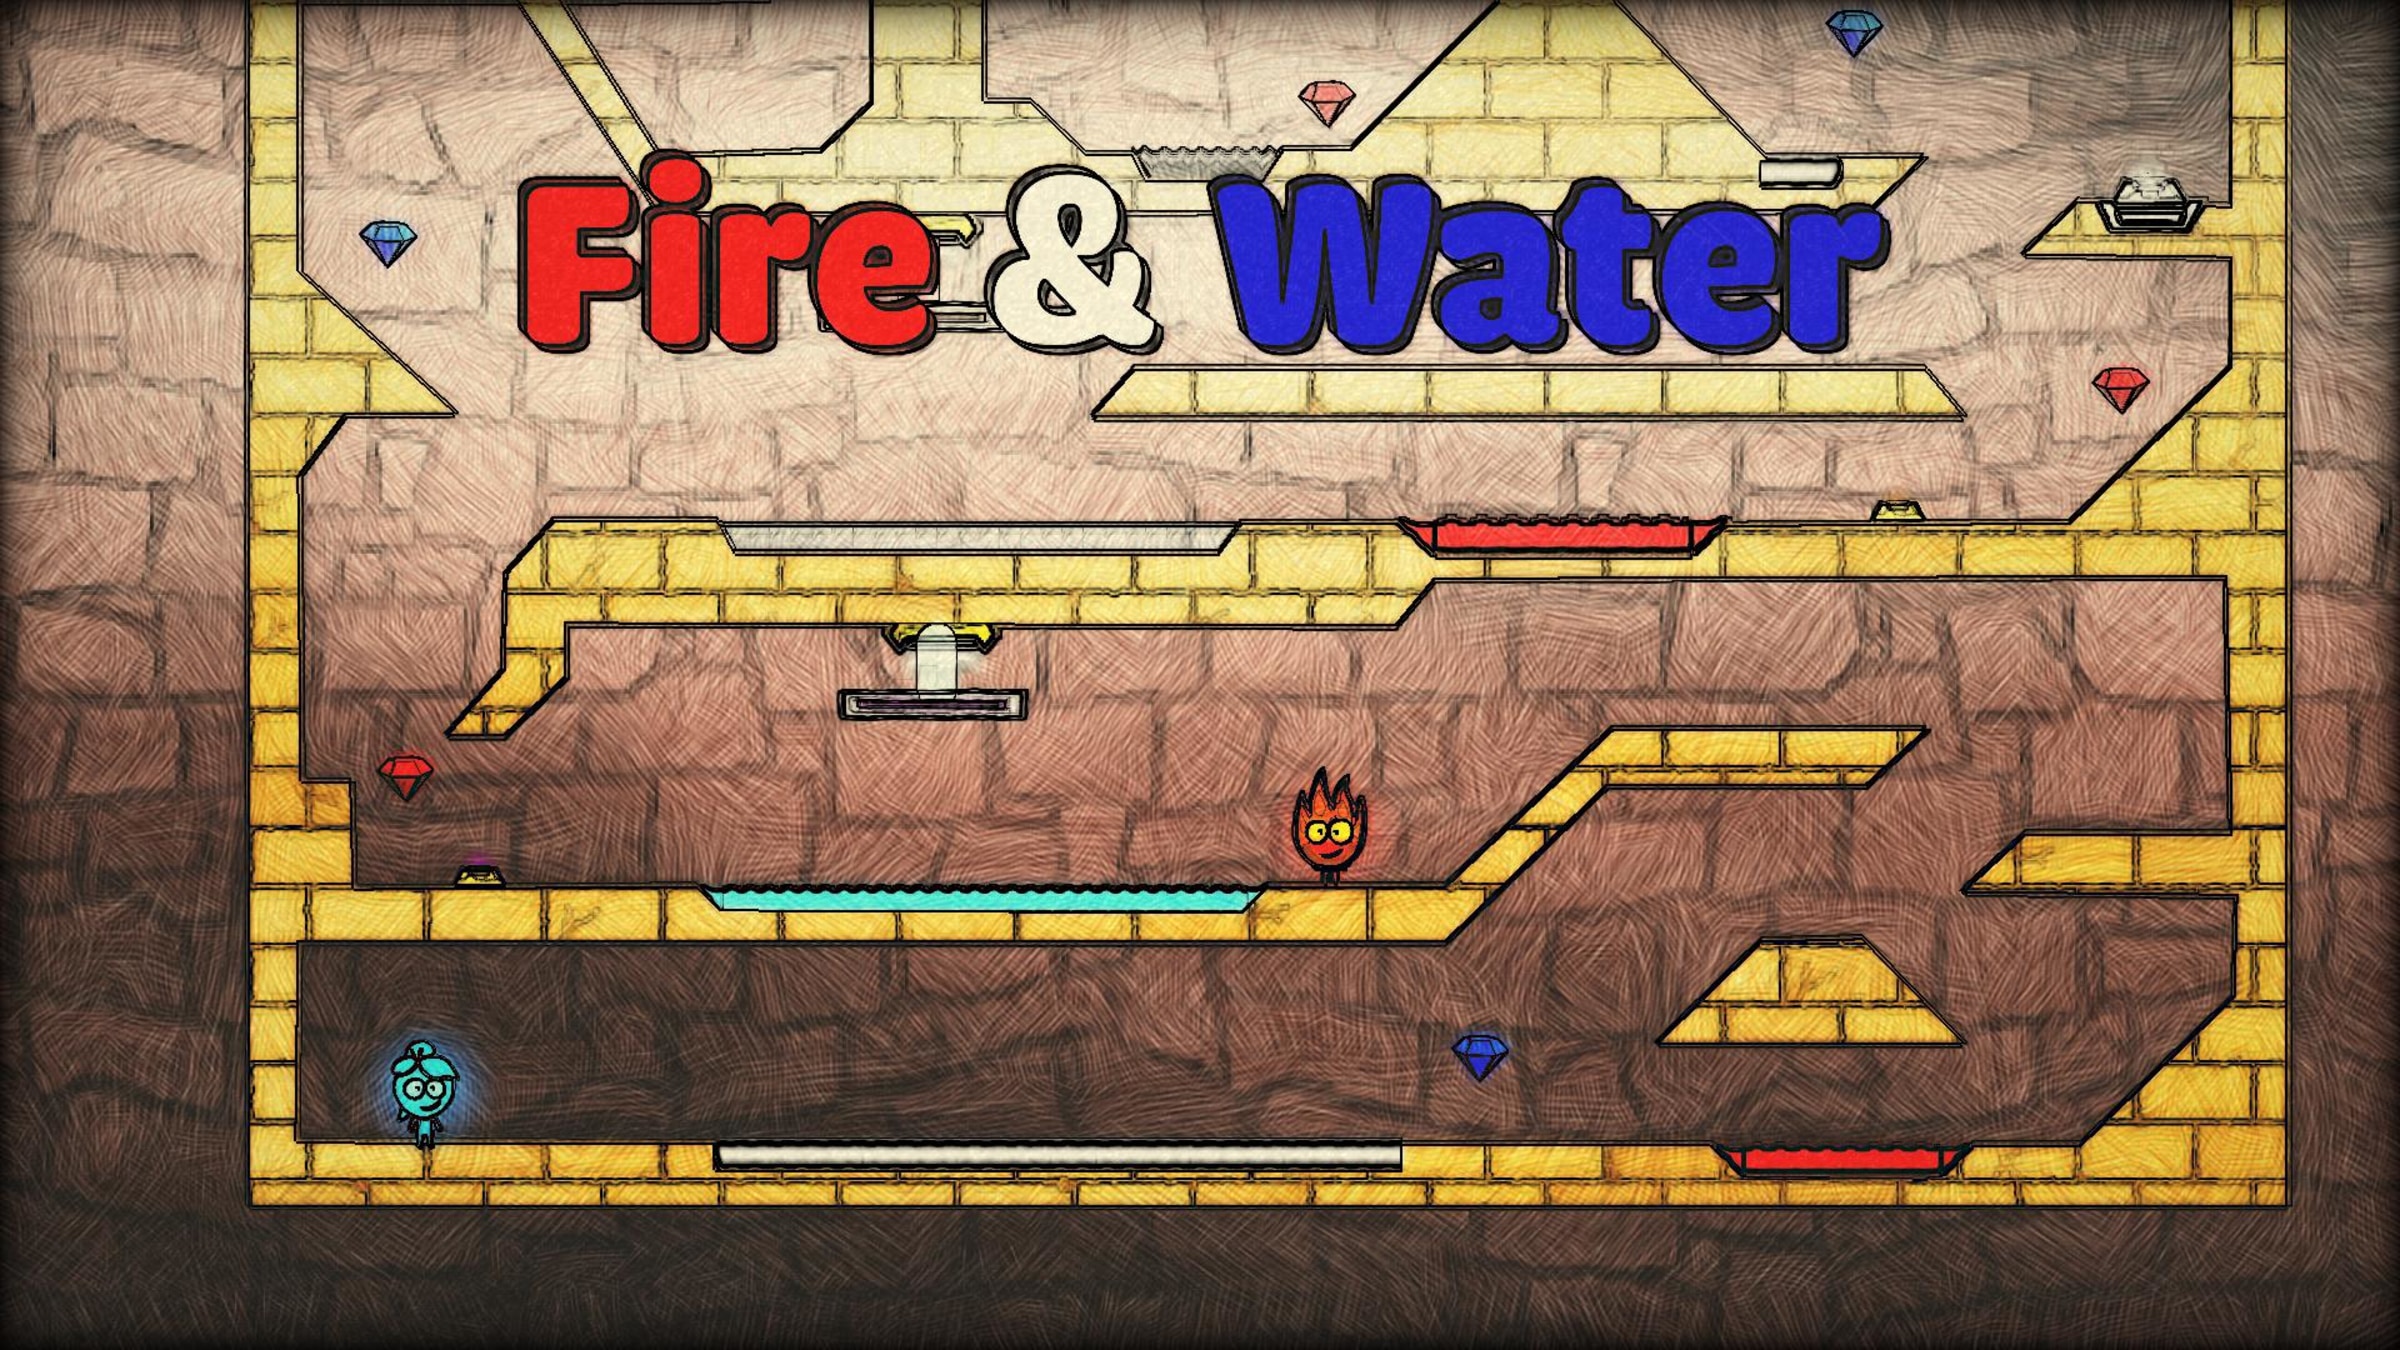 Fire Boy and Water Girl 2, 2 player games, Play Fire Boy and Water Girl 2  Game at .